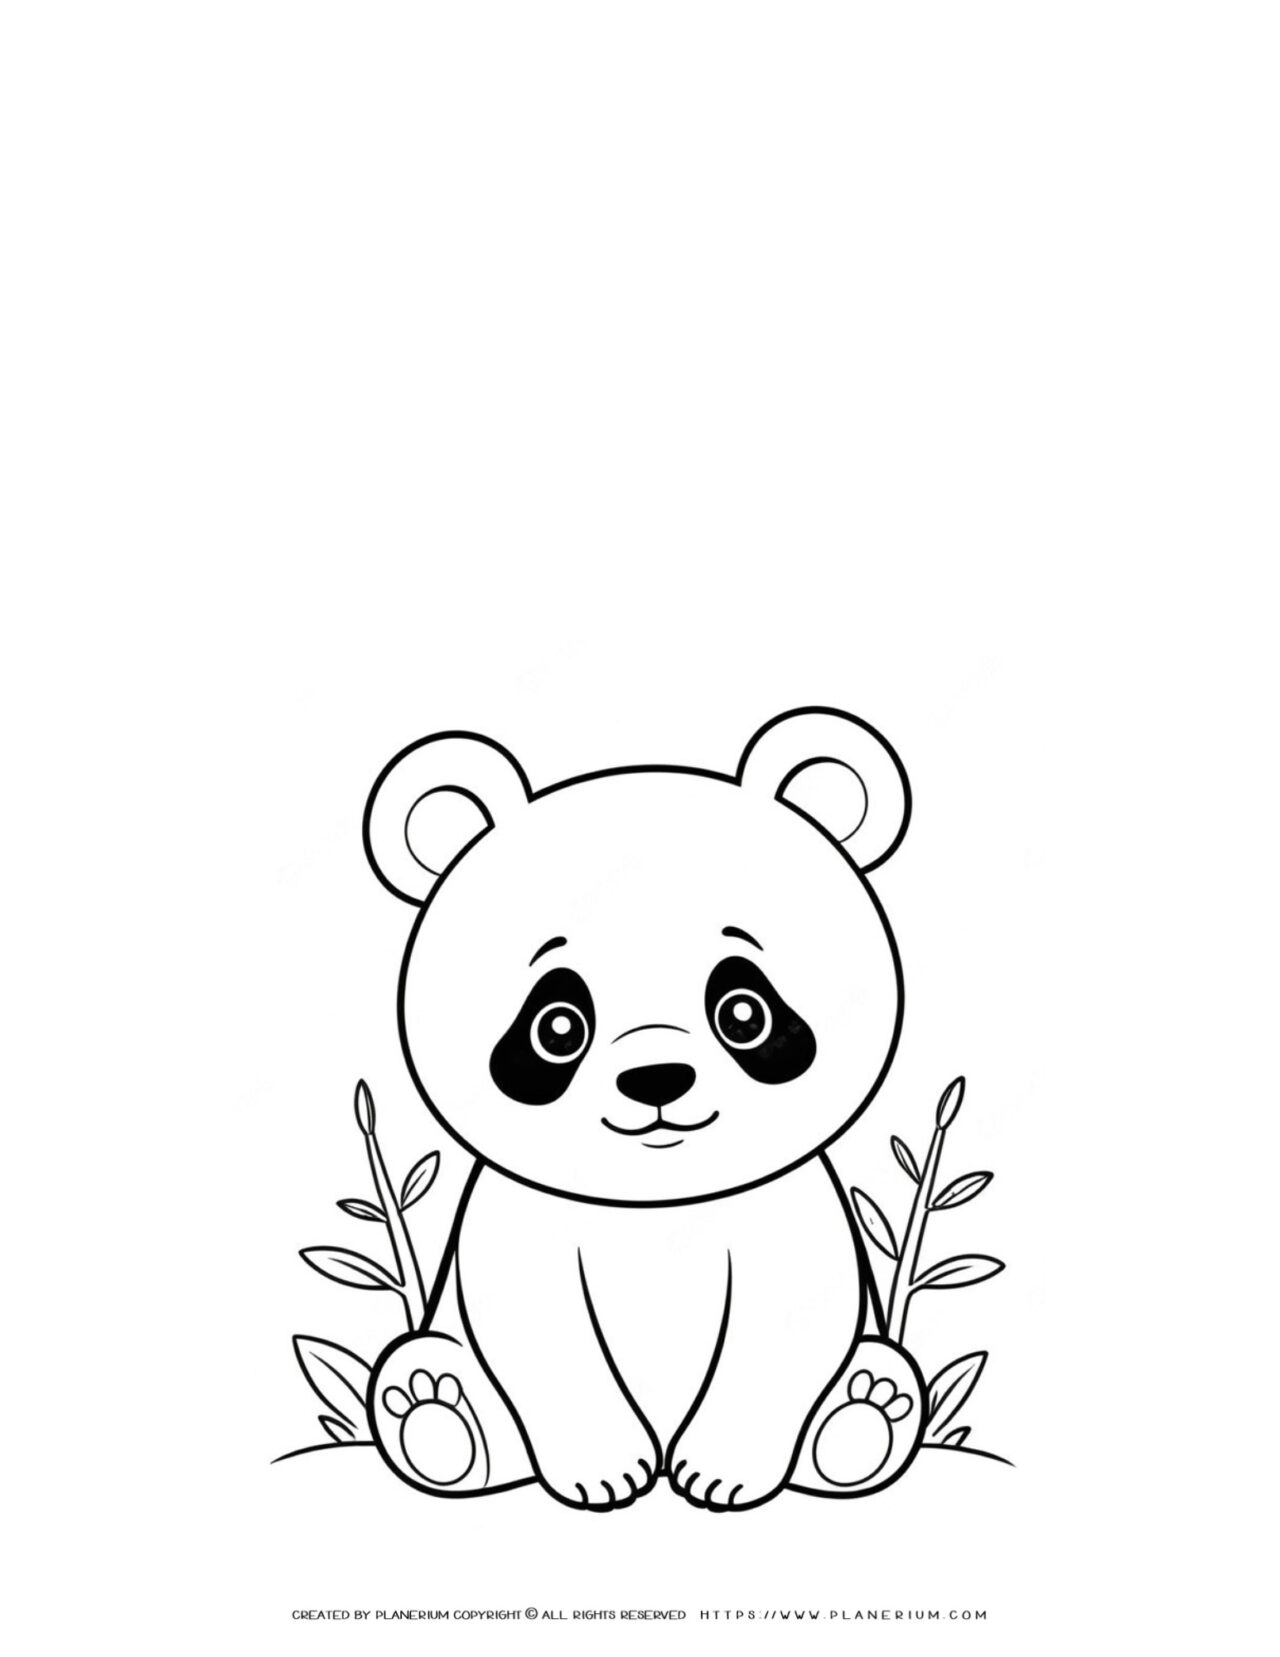 cute-panda-outline-writing-and-coloring-page-for-kids